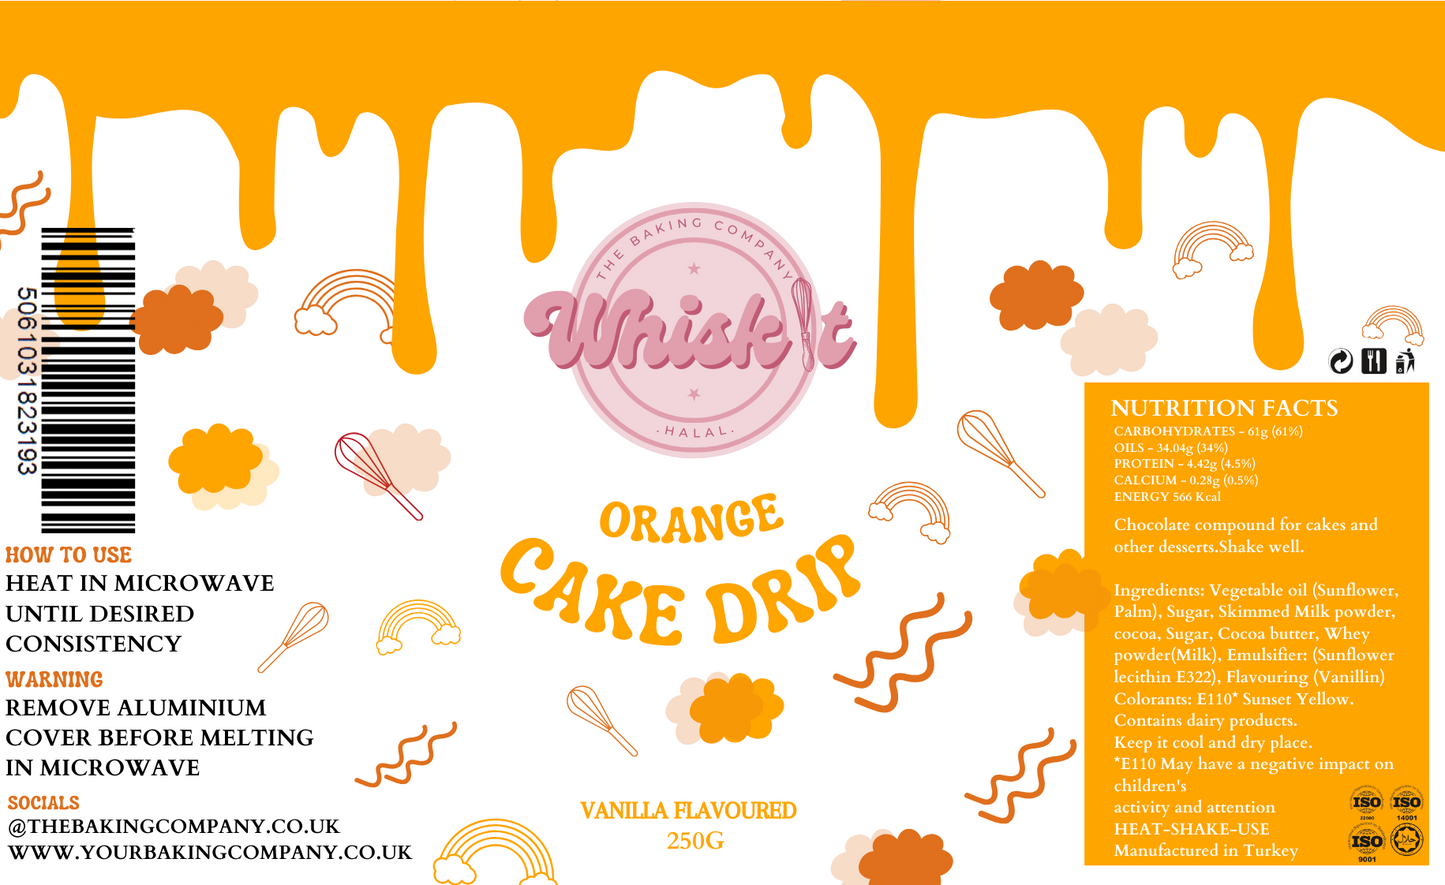 WHISK IT - Candy Melt Cake Drip